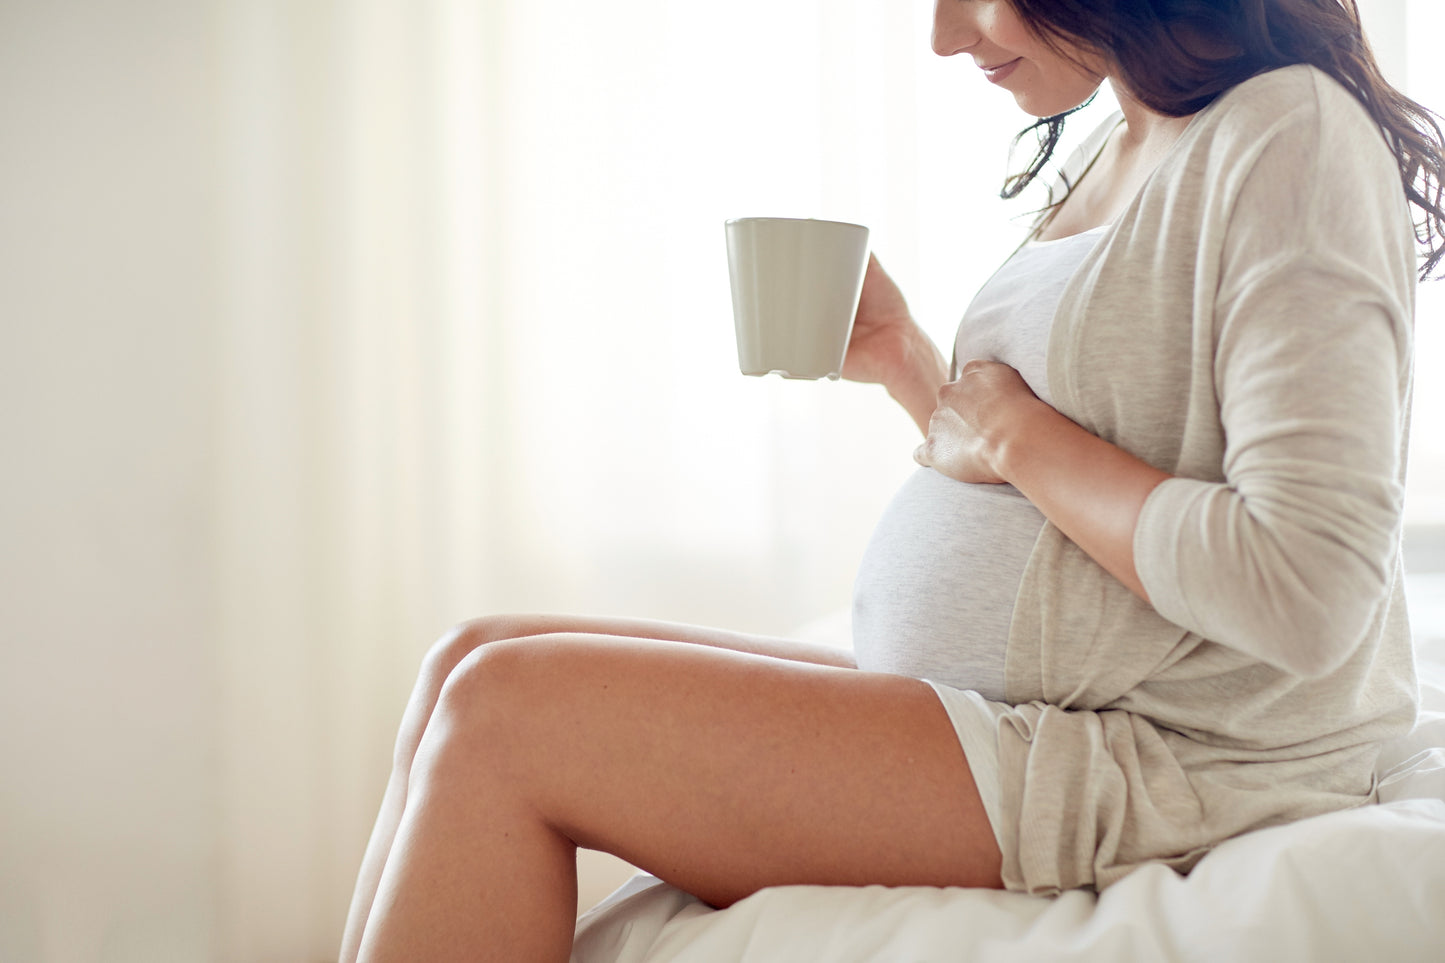 What Tea Is Safe to Drink While Pregnant?